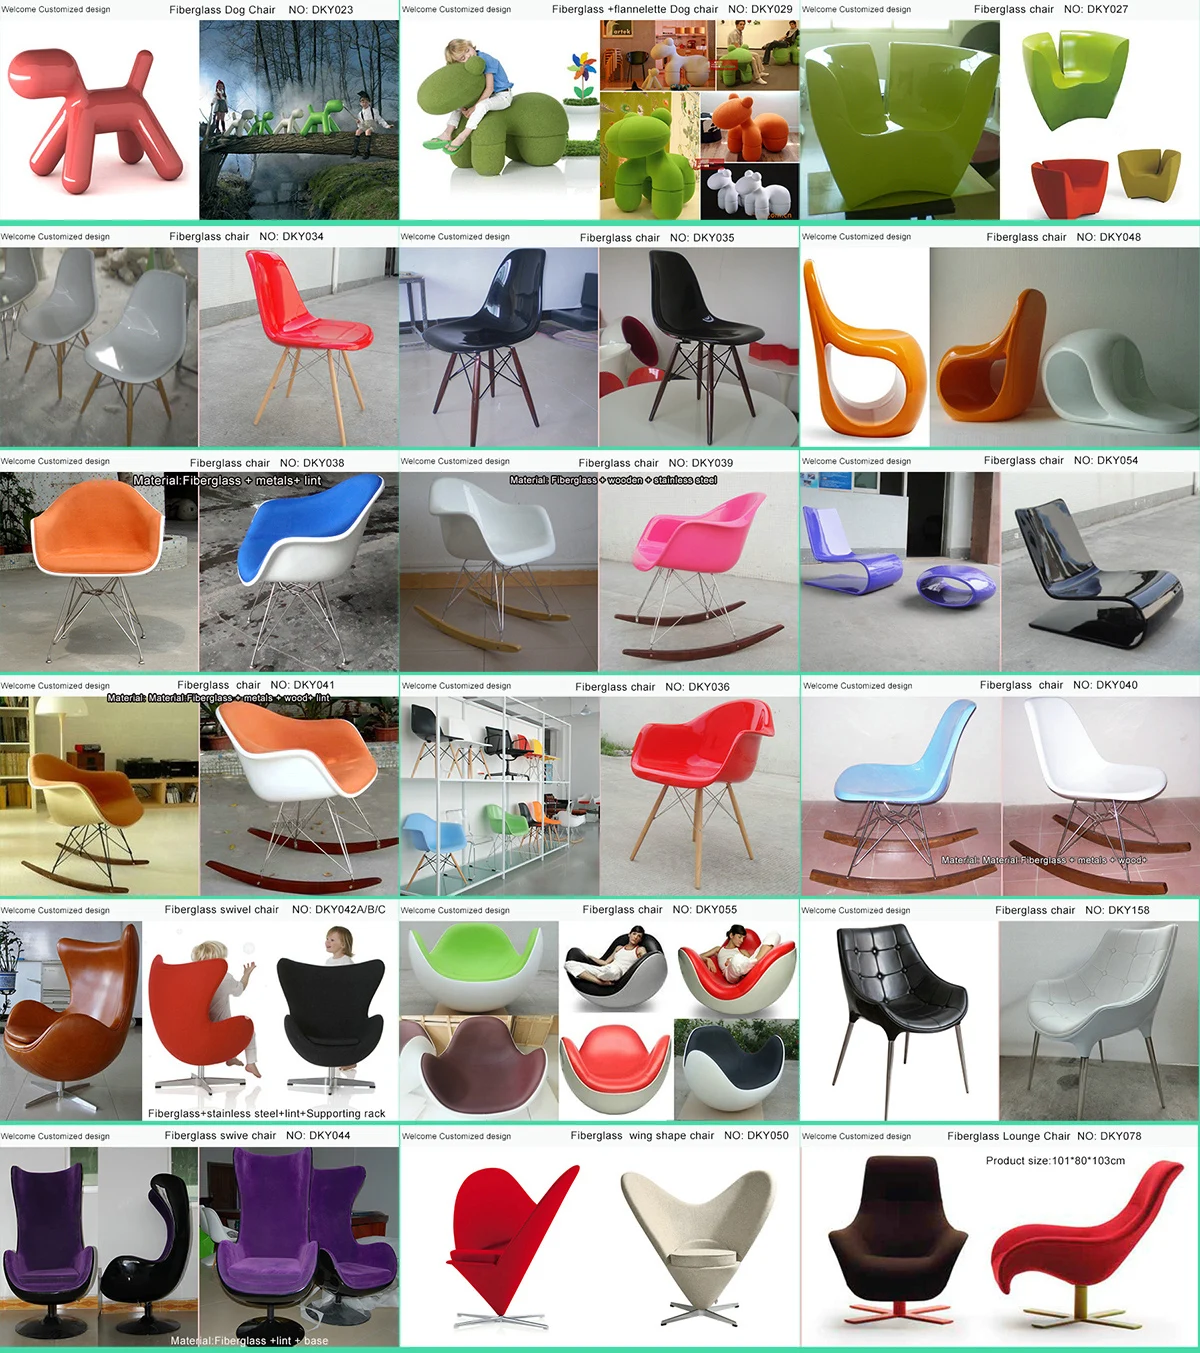 Y076 Frp Fiberglass Coffee Cup Shaped Chair - Buy Cup Shaped Chair,Coffee  Cup Shape Chair,Coffee Cup Chair Product on Alibaba.com